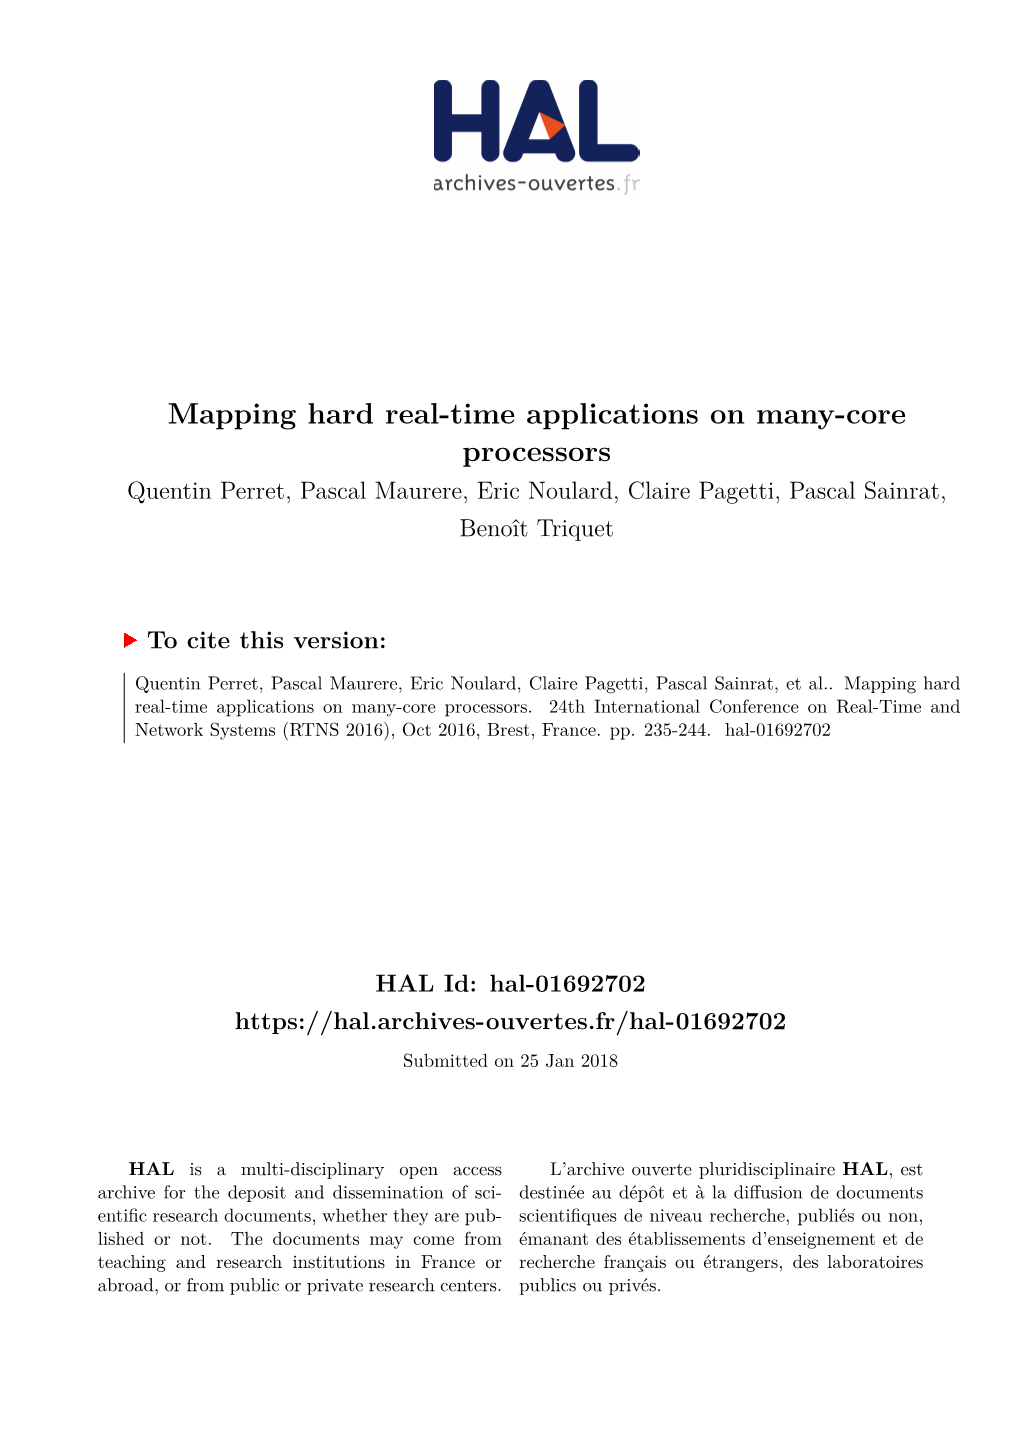 Mapping Hard Real-Time Applications on Many-Core Processors Quentin Perret, Pascal Maurere, Eric Noulard, Claire Pagetti, Pascal Sainrat, Benoît Triquet